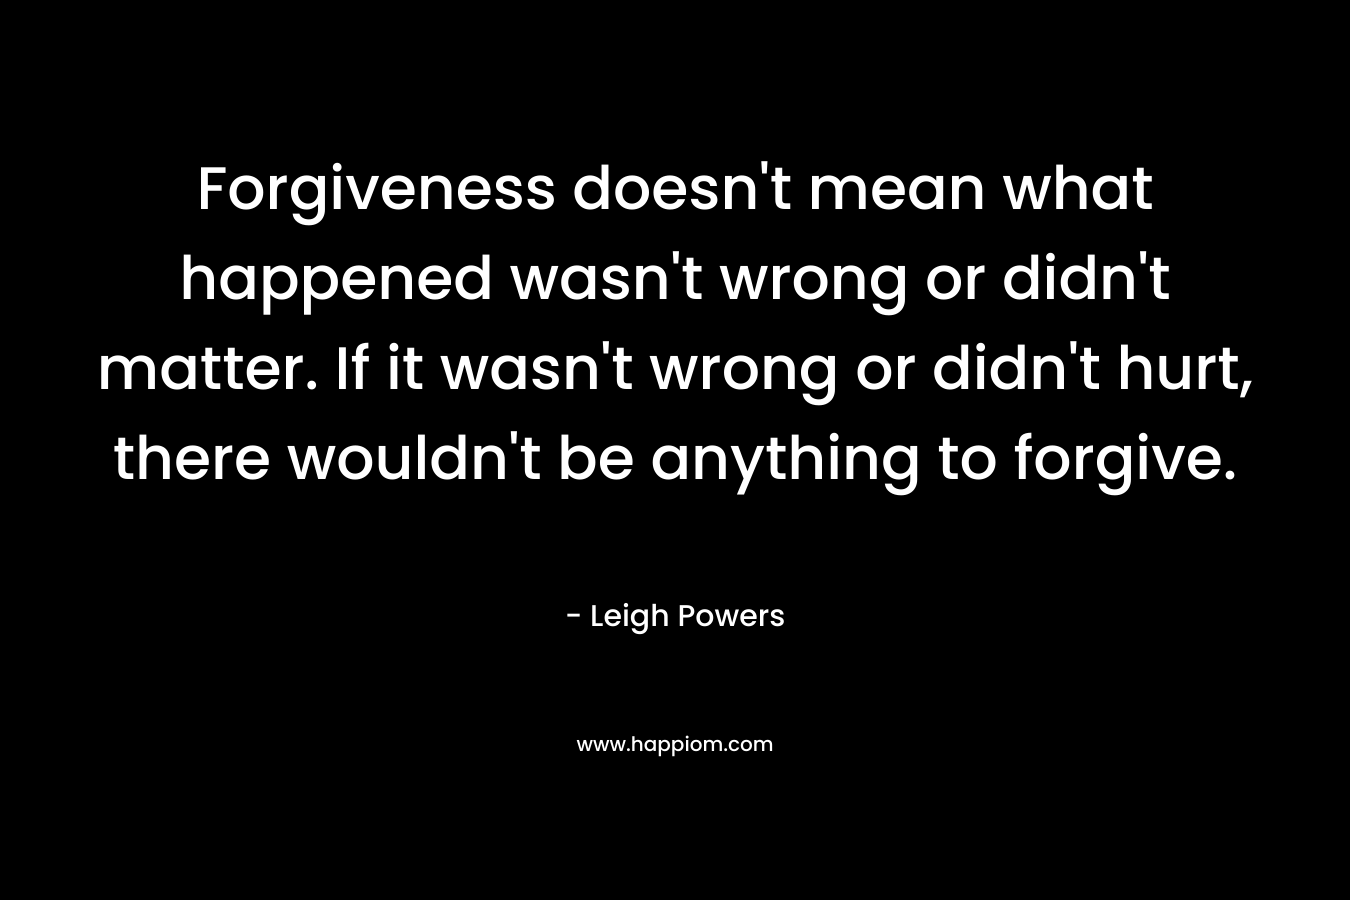 Forgiveness doesn't mean what happened wasn't wrong or didn't matter. If it wasn't wrong or didn't hurt, there wouldn't be anything to forgive.